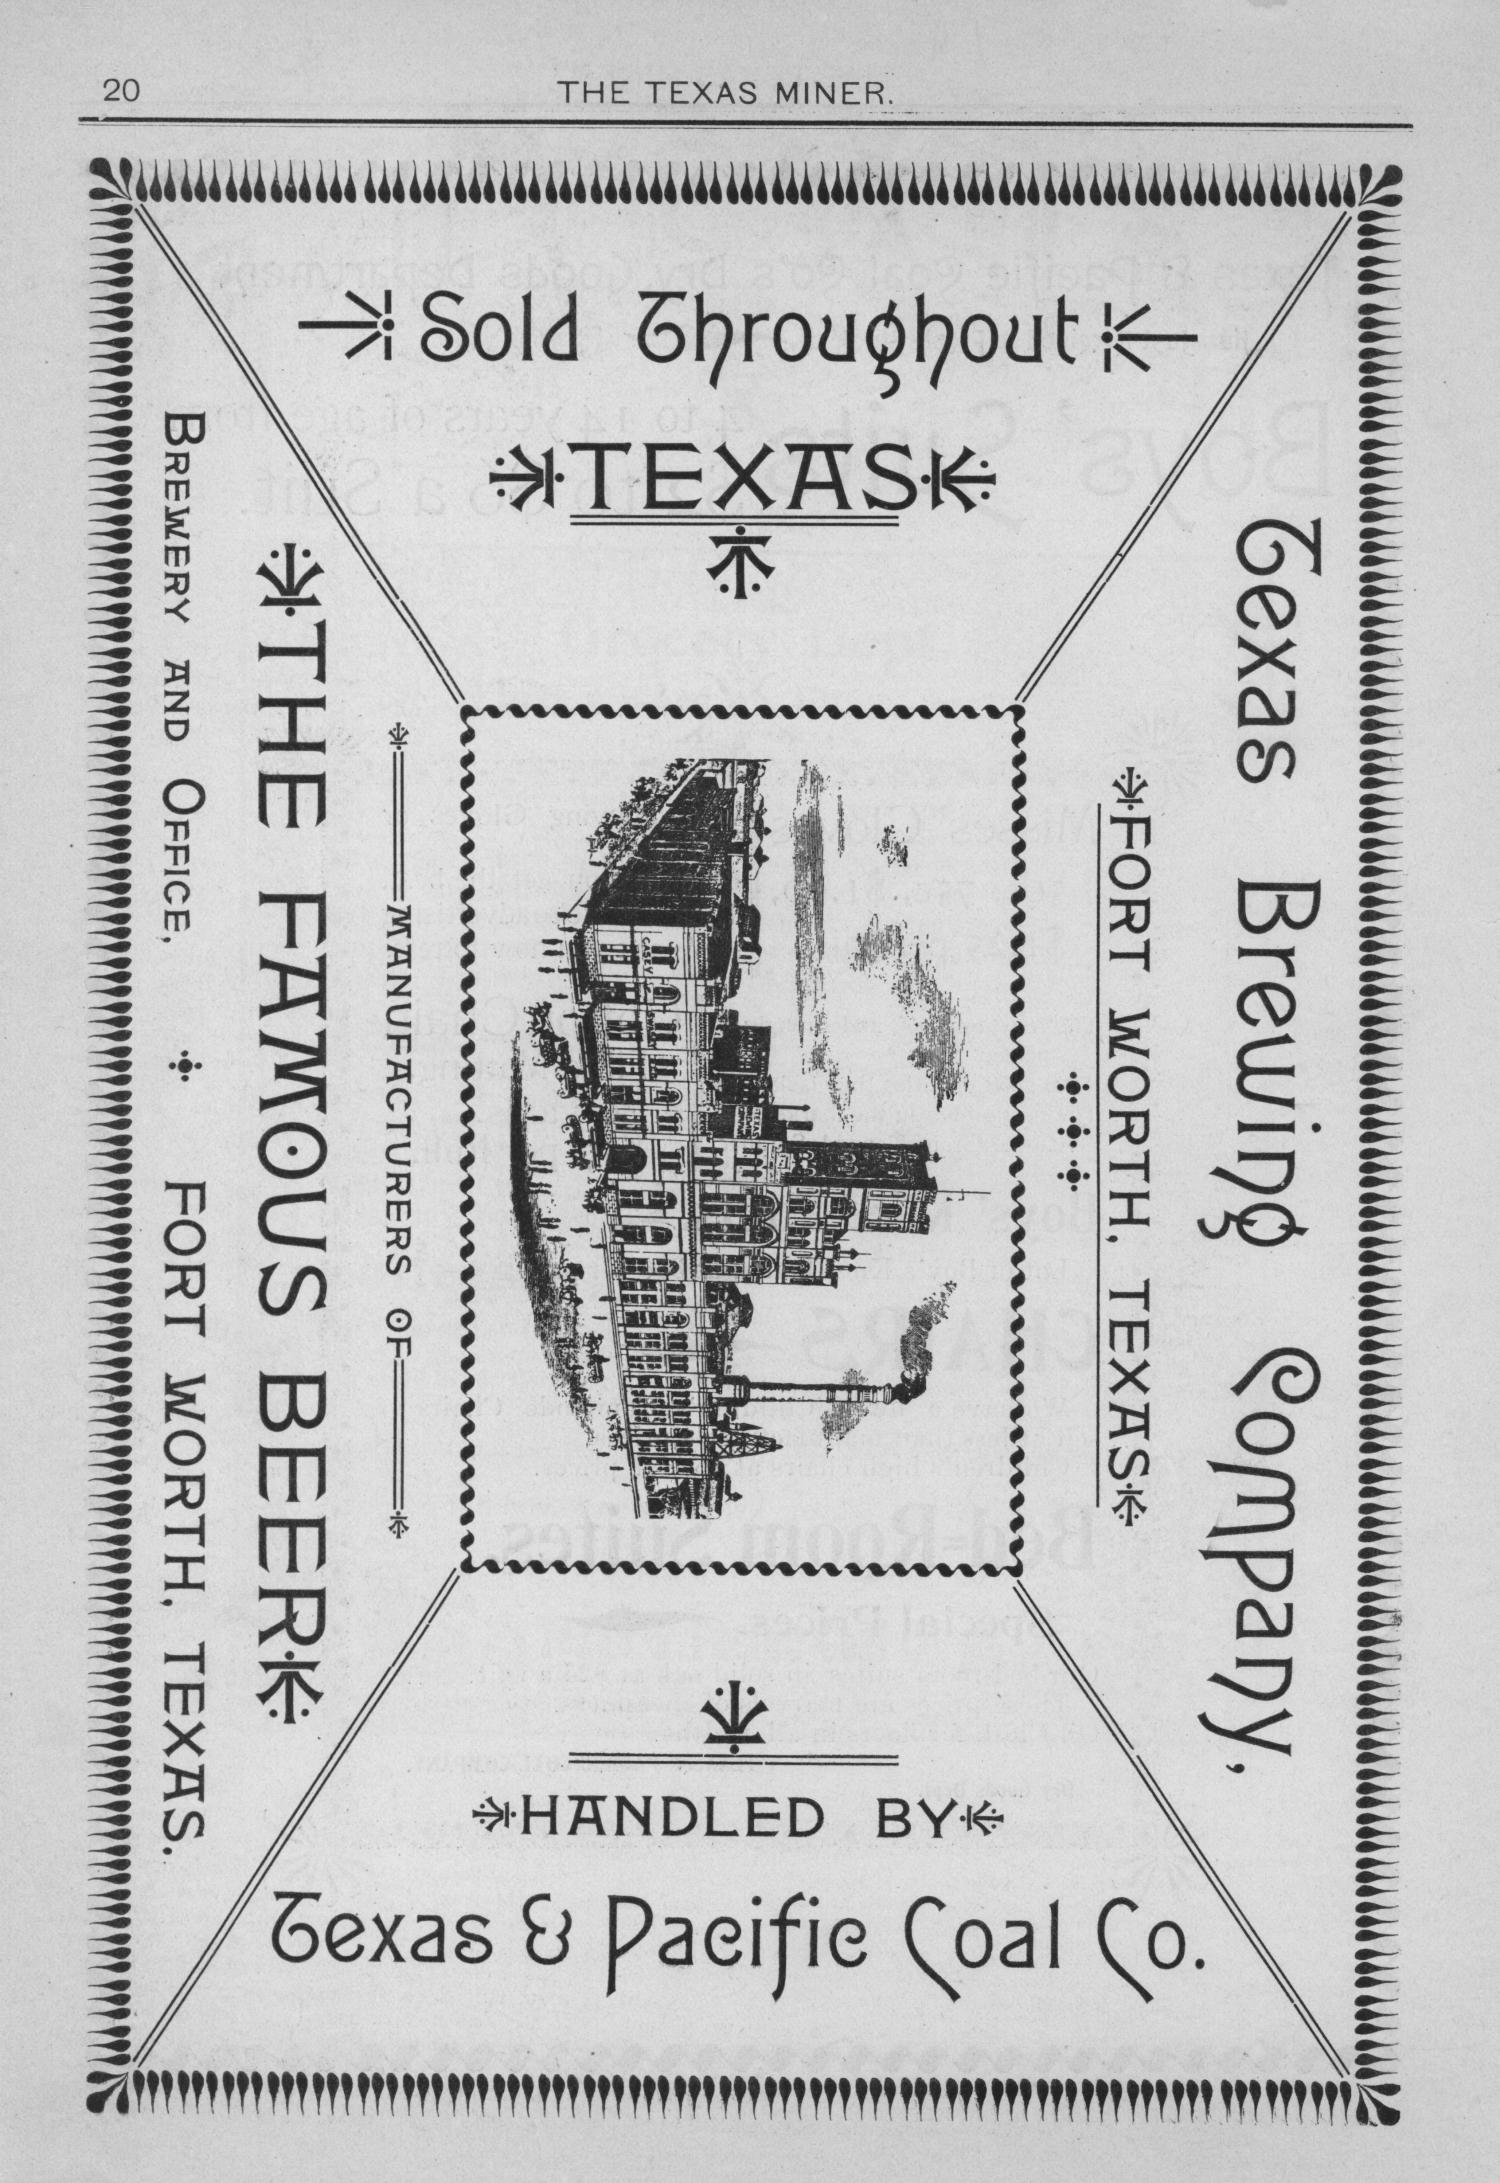 The Texas Miner, Volume 1, Number 27, July 21, 1894
                                                
                                                    20
                                                